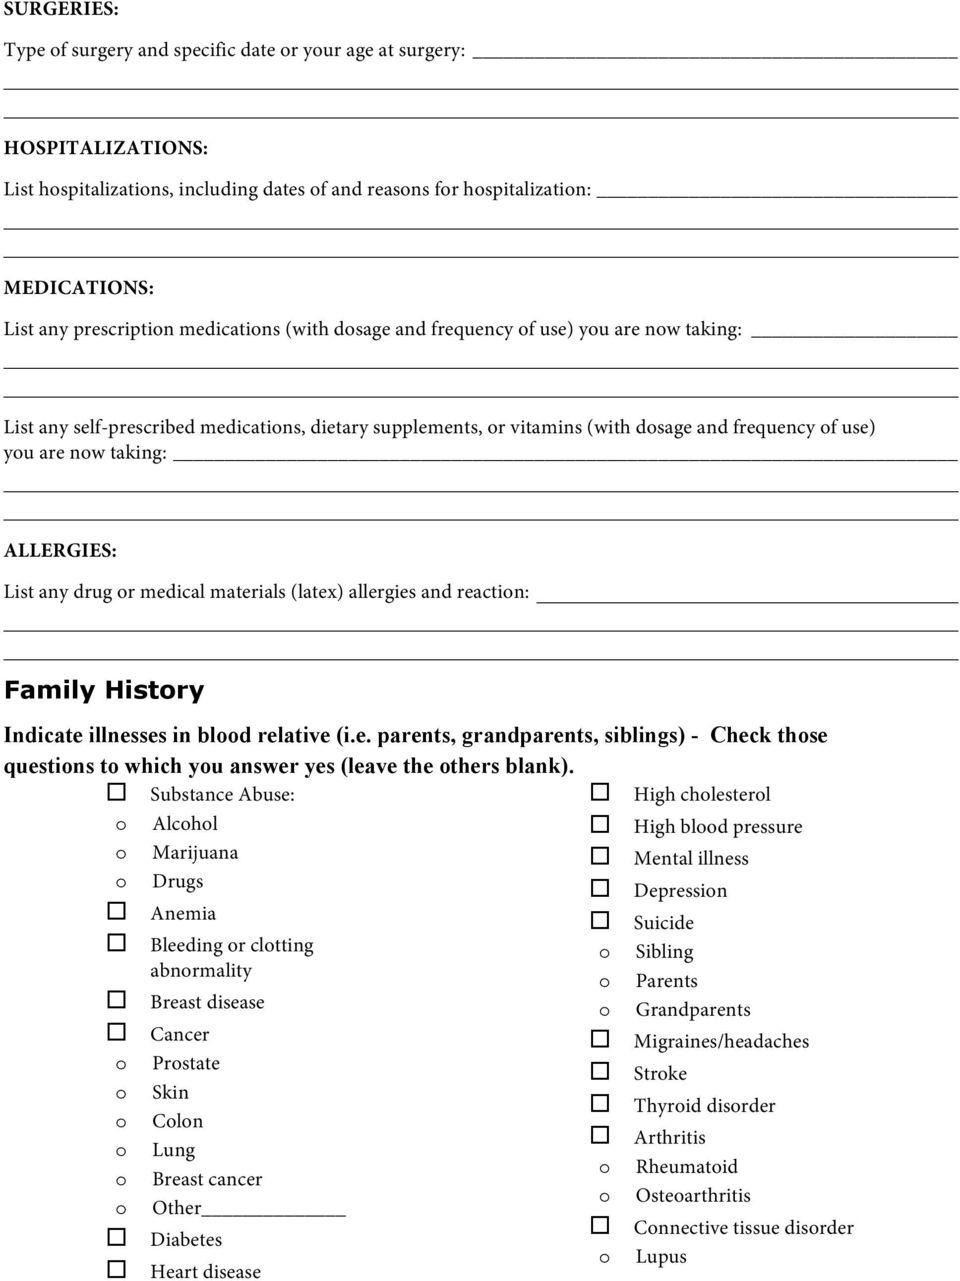 ALLERGIES: List any drug or medical materials (latex) allergies and reaction: Family History Indicate illnesses in blood relative (i.e. parents, grandparents, siblings) - Check those questions to which you answer yes (leave the others blank).